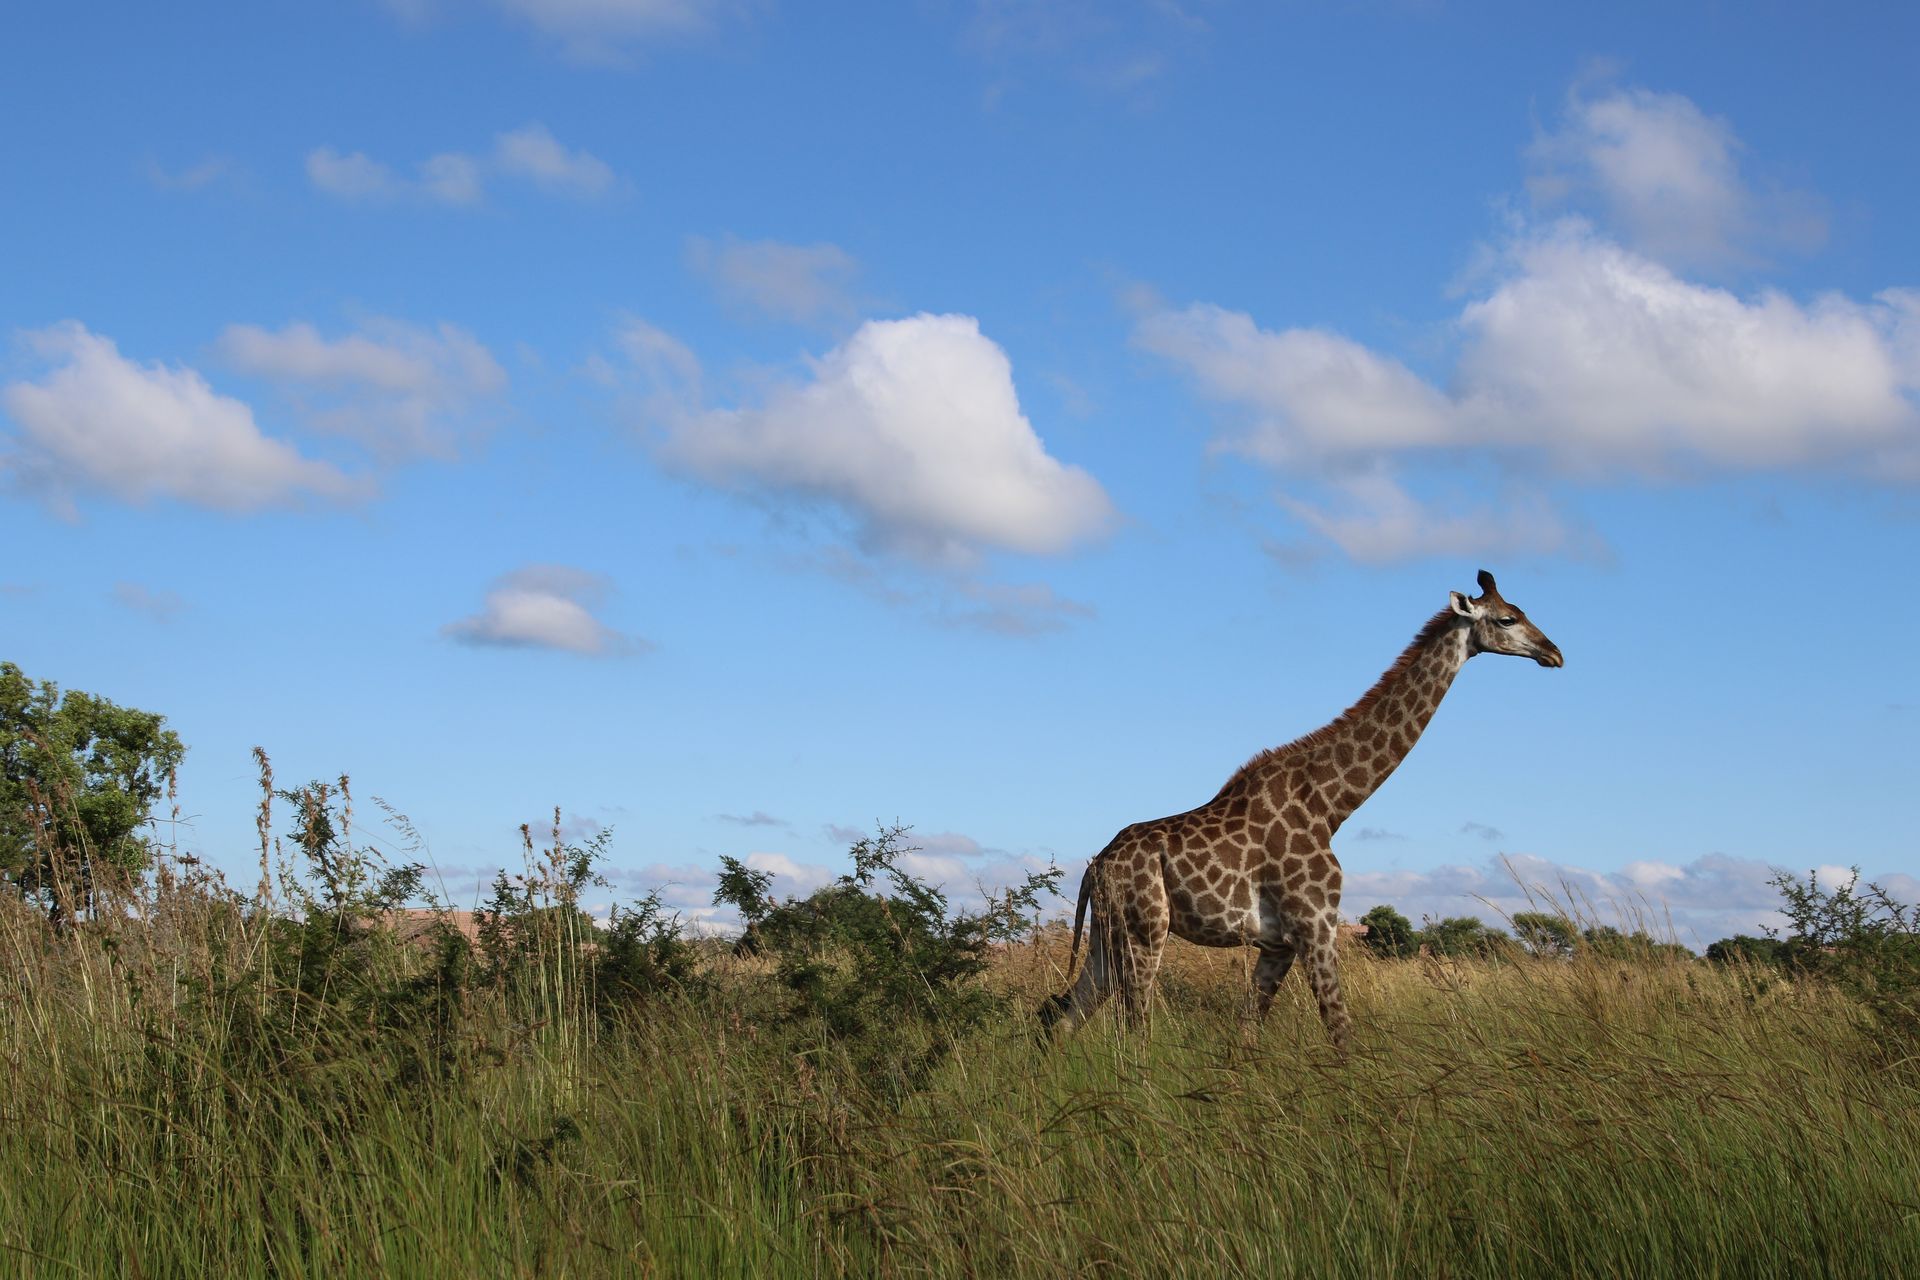 a giraffe standing in a field with a blue sky and clouds behind it